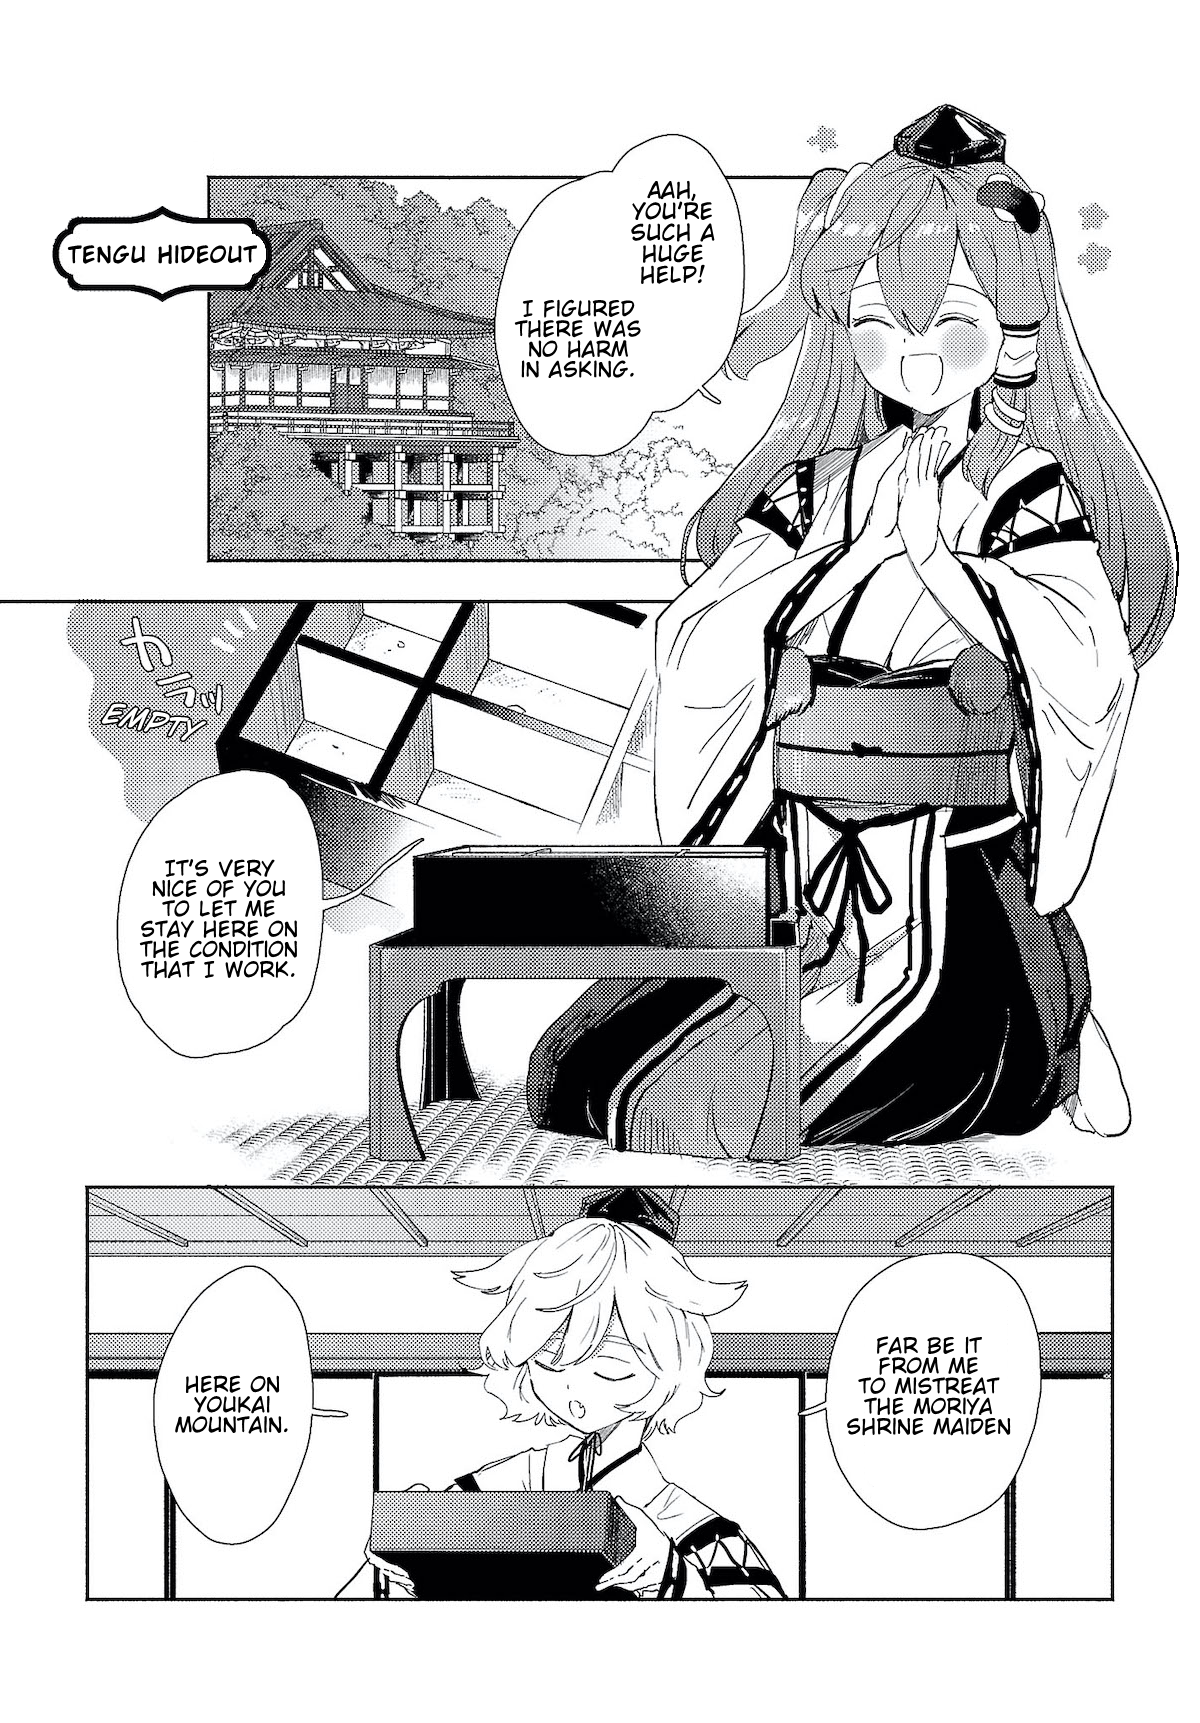 Touhou - Sanae-San Is On The Run! - Page 2